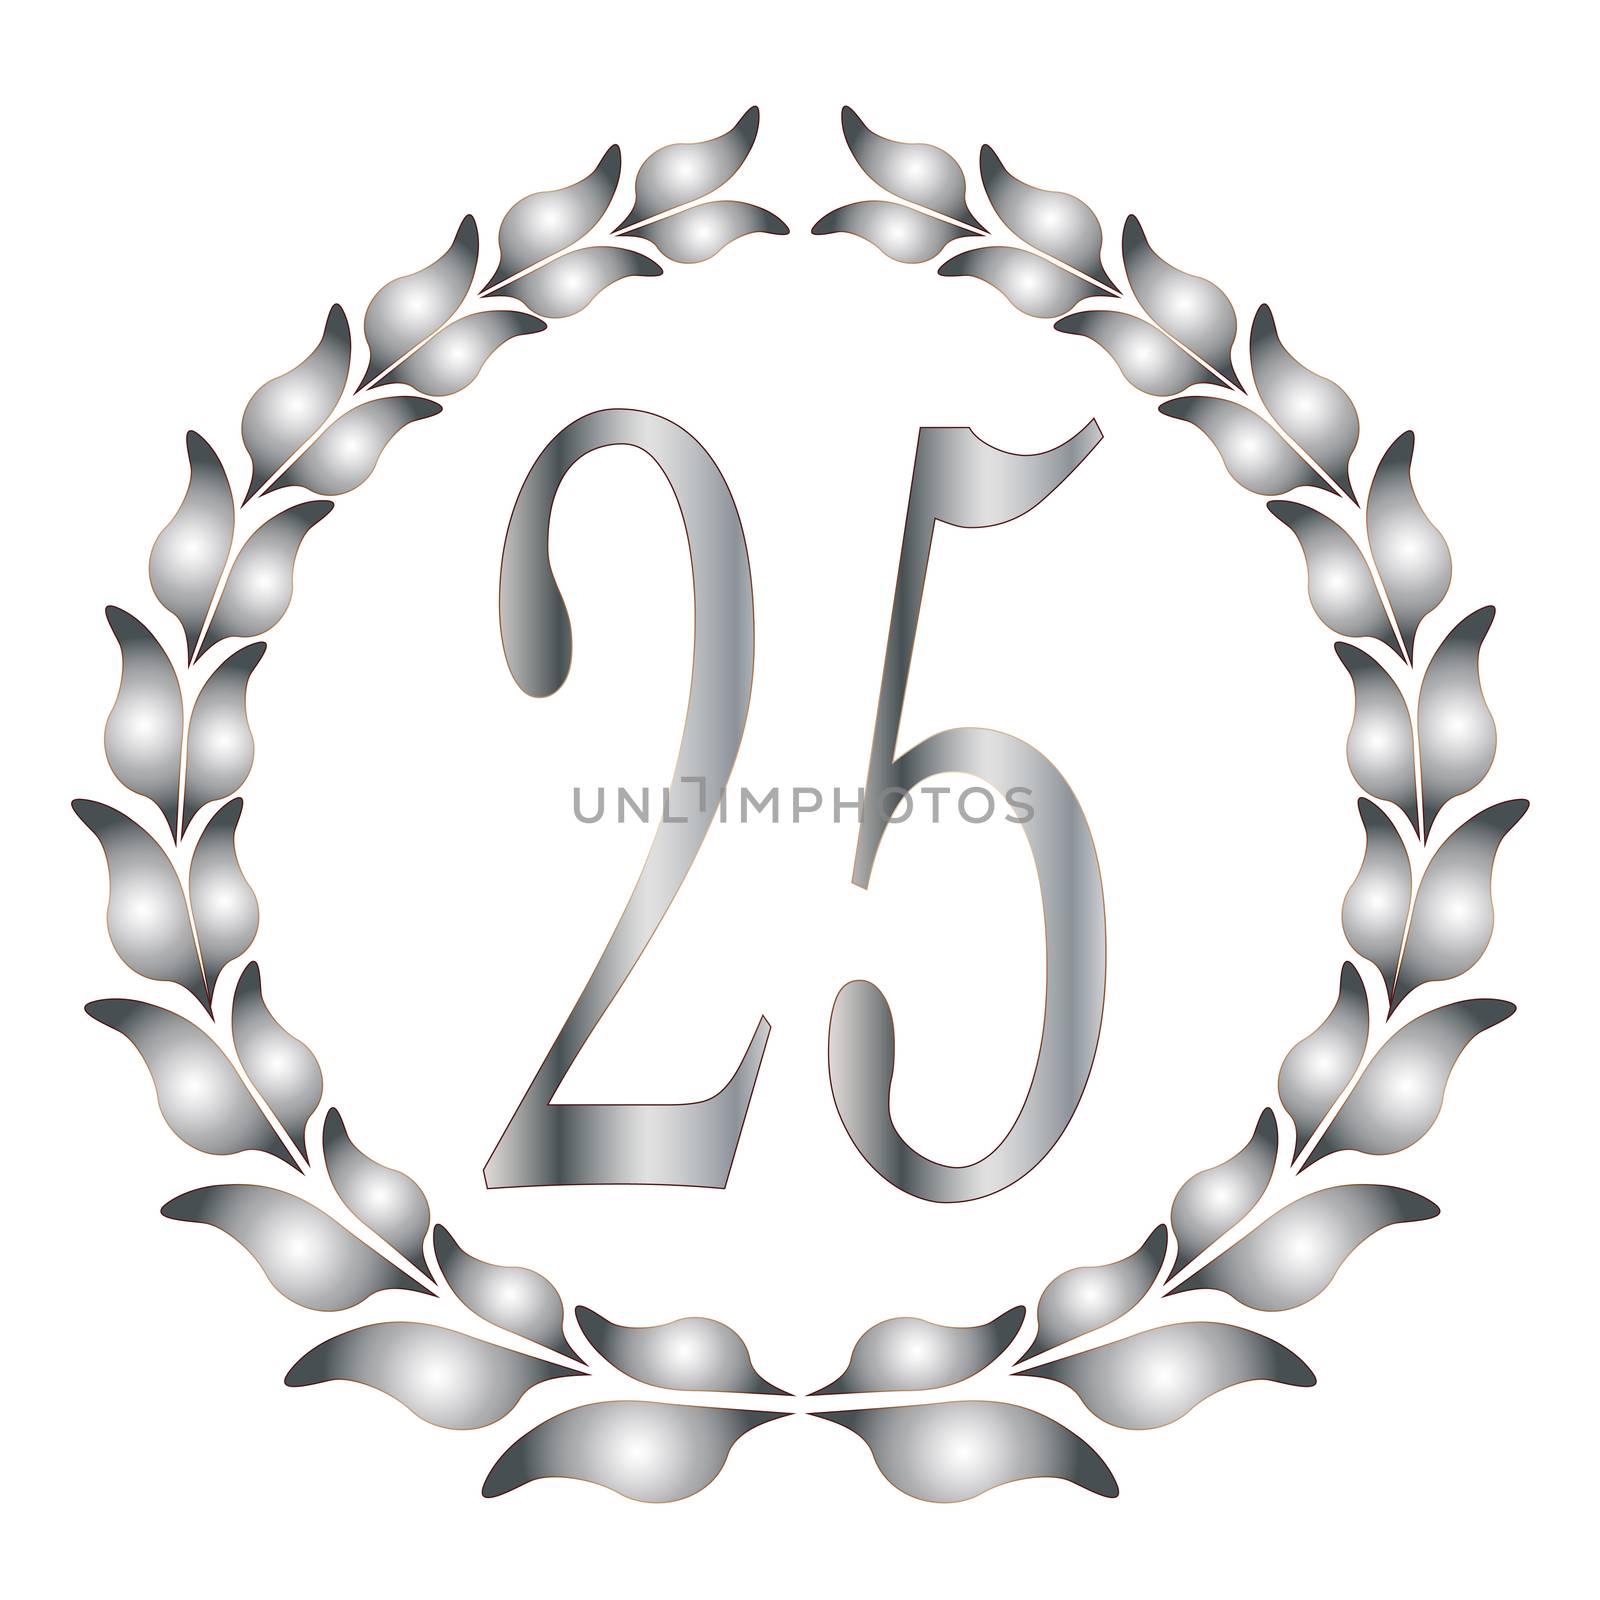 A 25th anniversary laurel over a white background